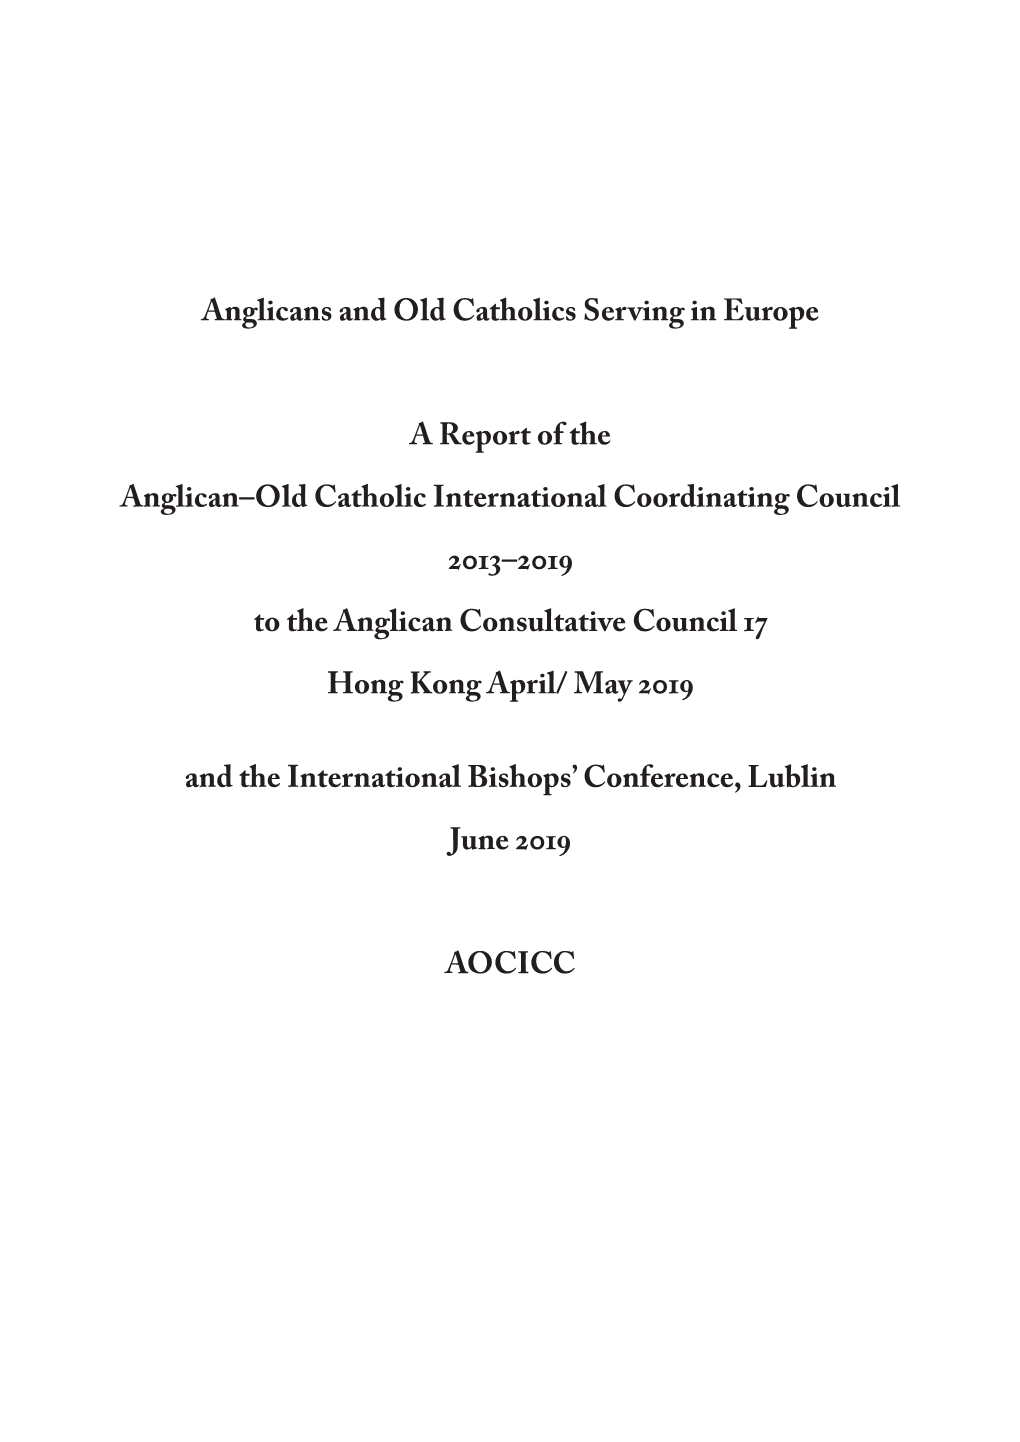 Anglicans and Old Catholics Serving in Europe 2019 Report